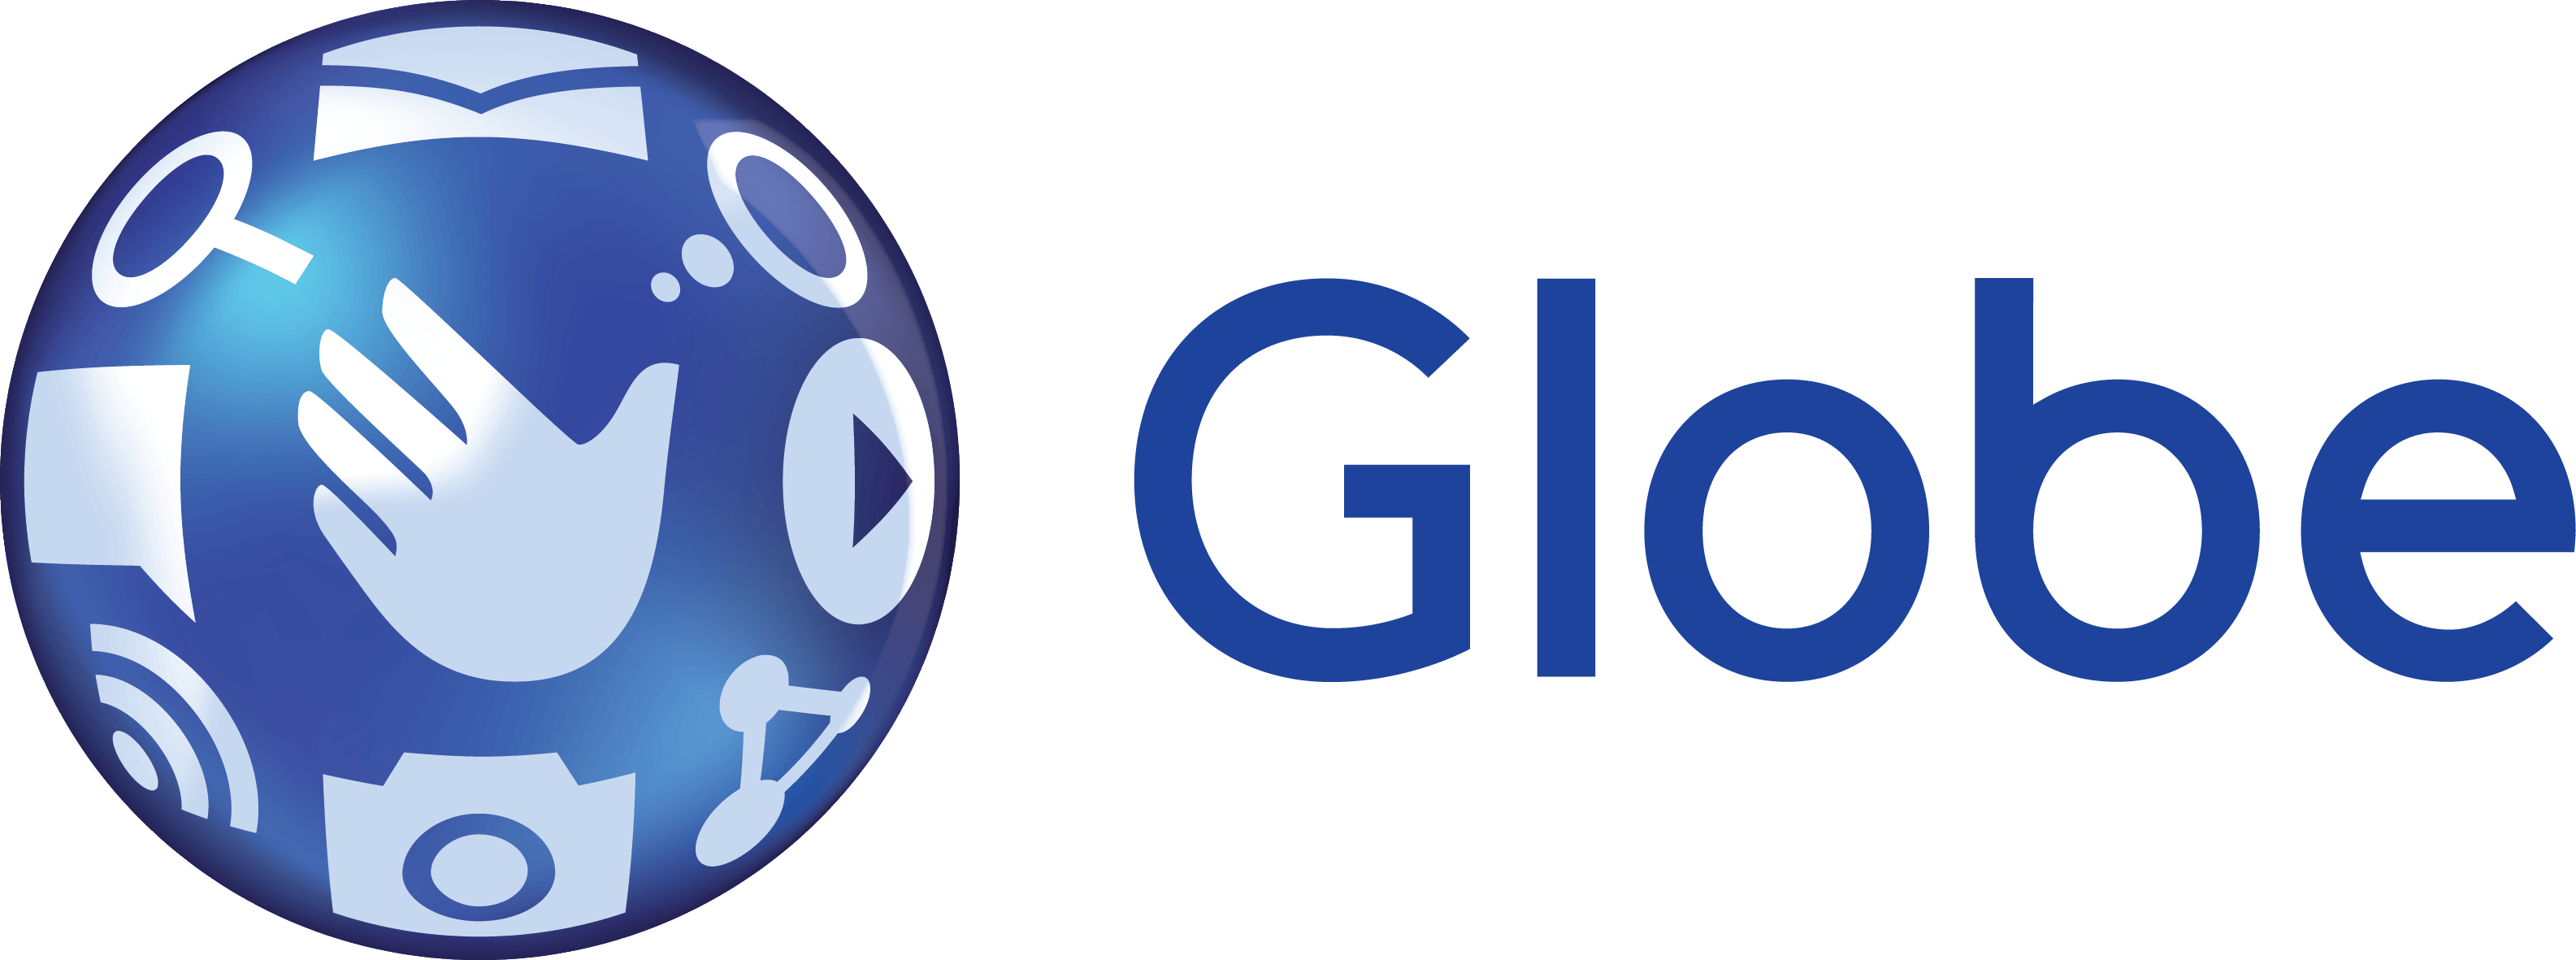 Pacific Globe Logo - Globe #1stWorldInternetPH is best telecom campaign in Asia Pacific ...